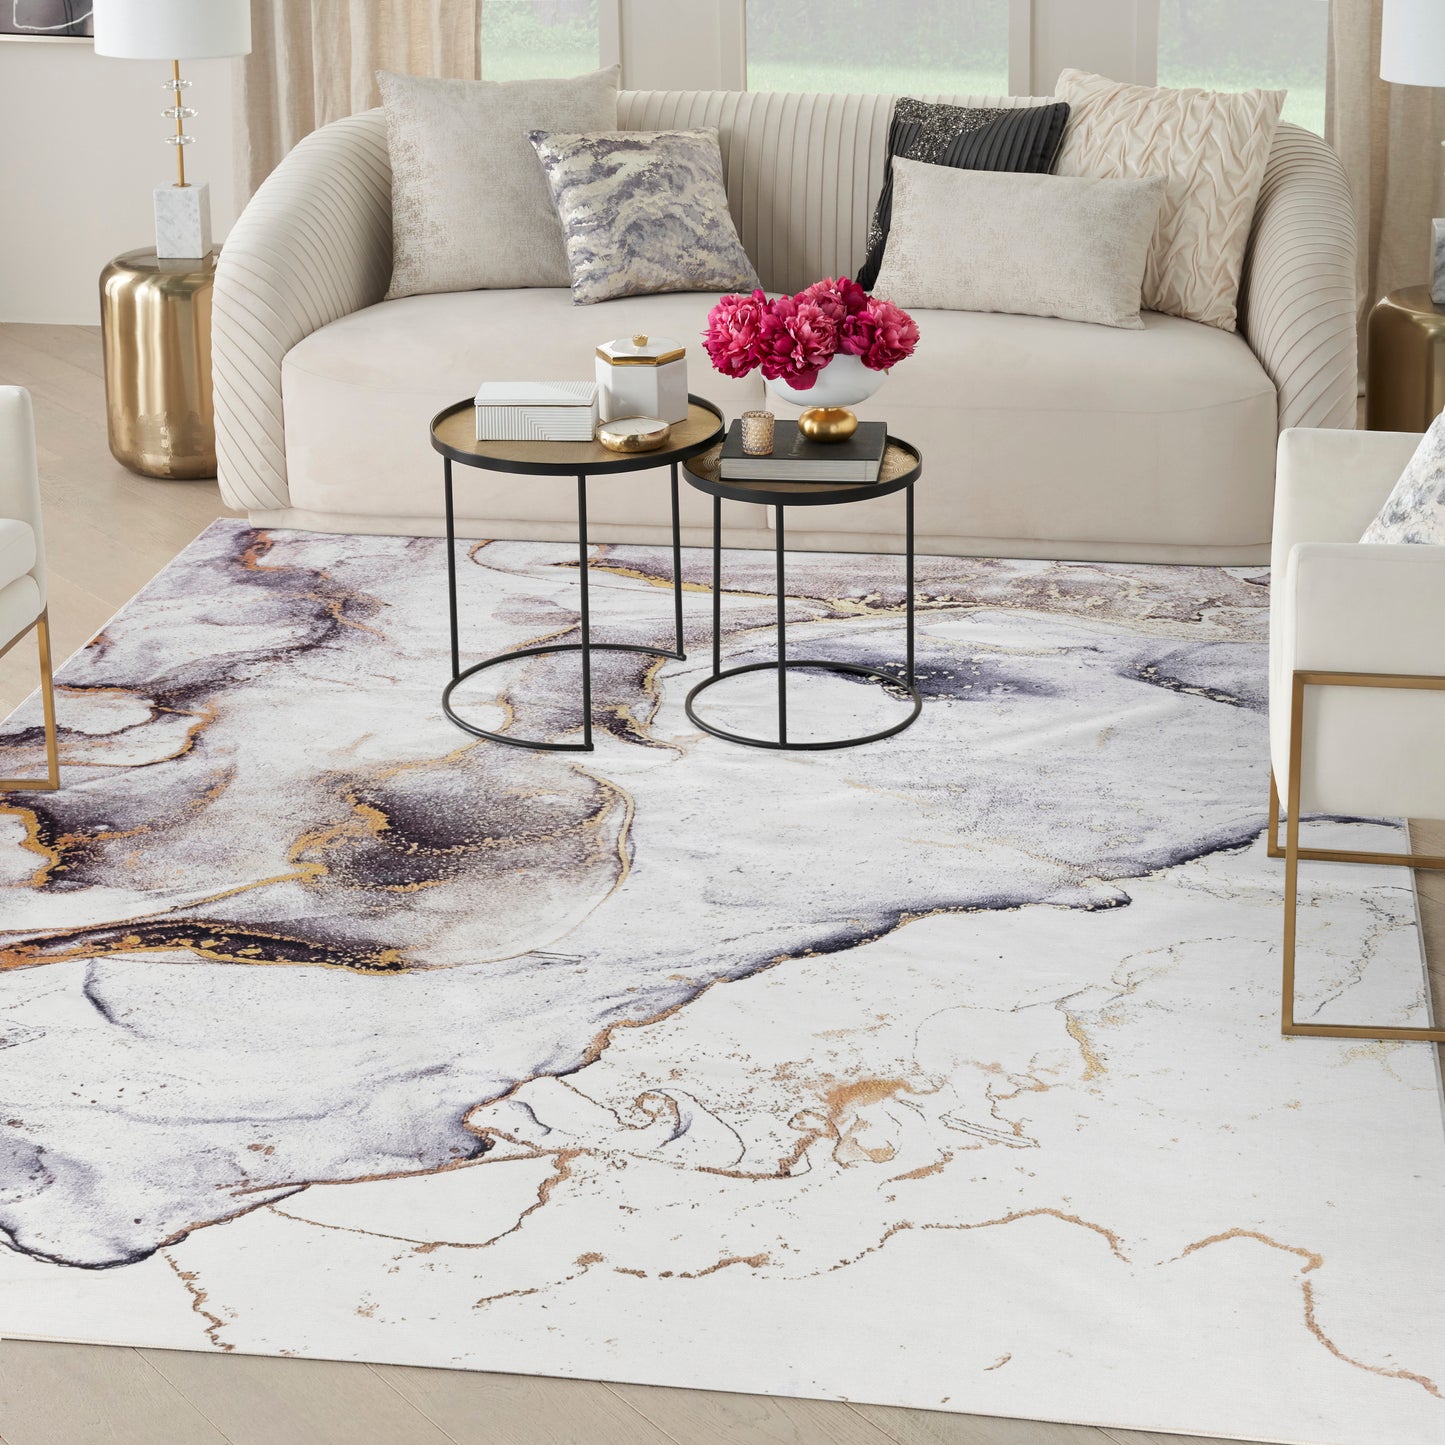 Inspire Me! Home Décor Daydream DDR01 Ivory Multicolor  Contemporary Machinemade Rug